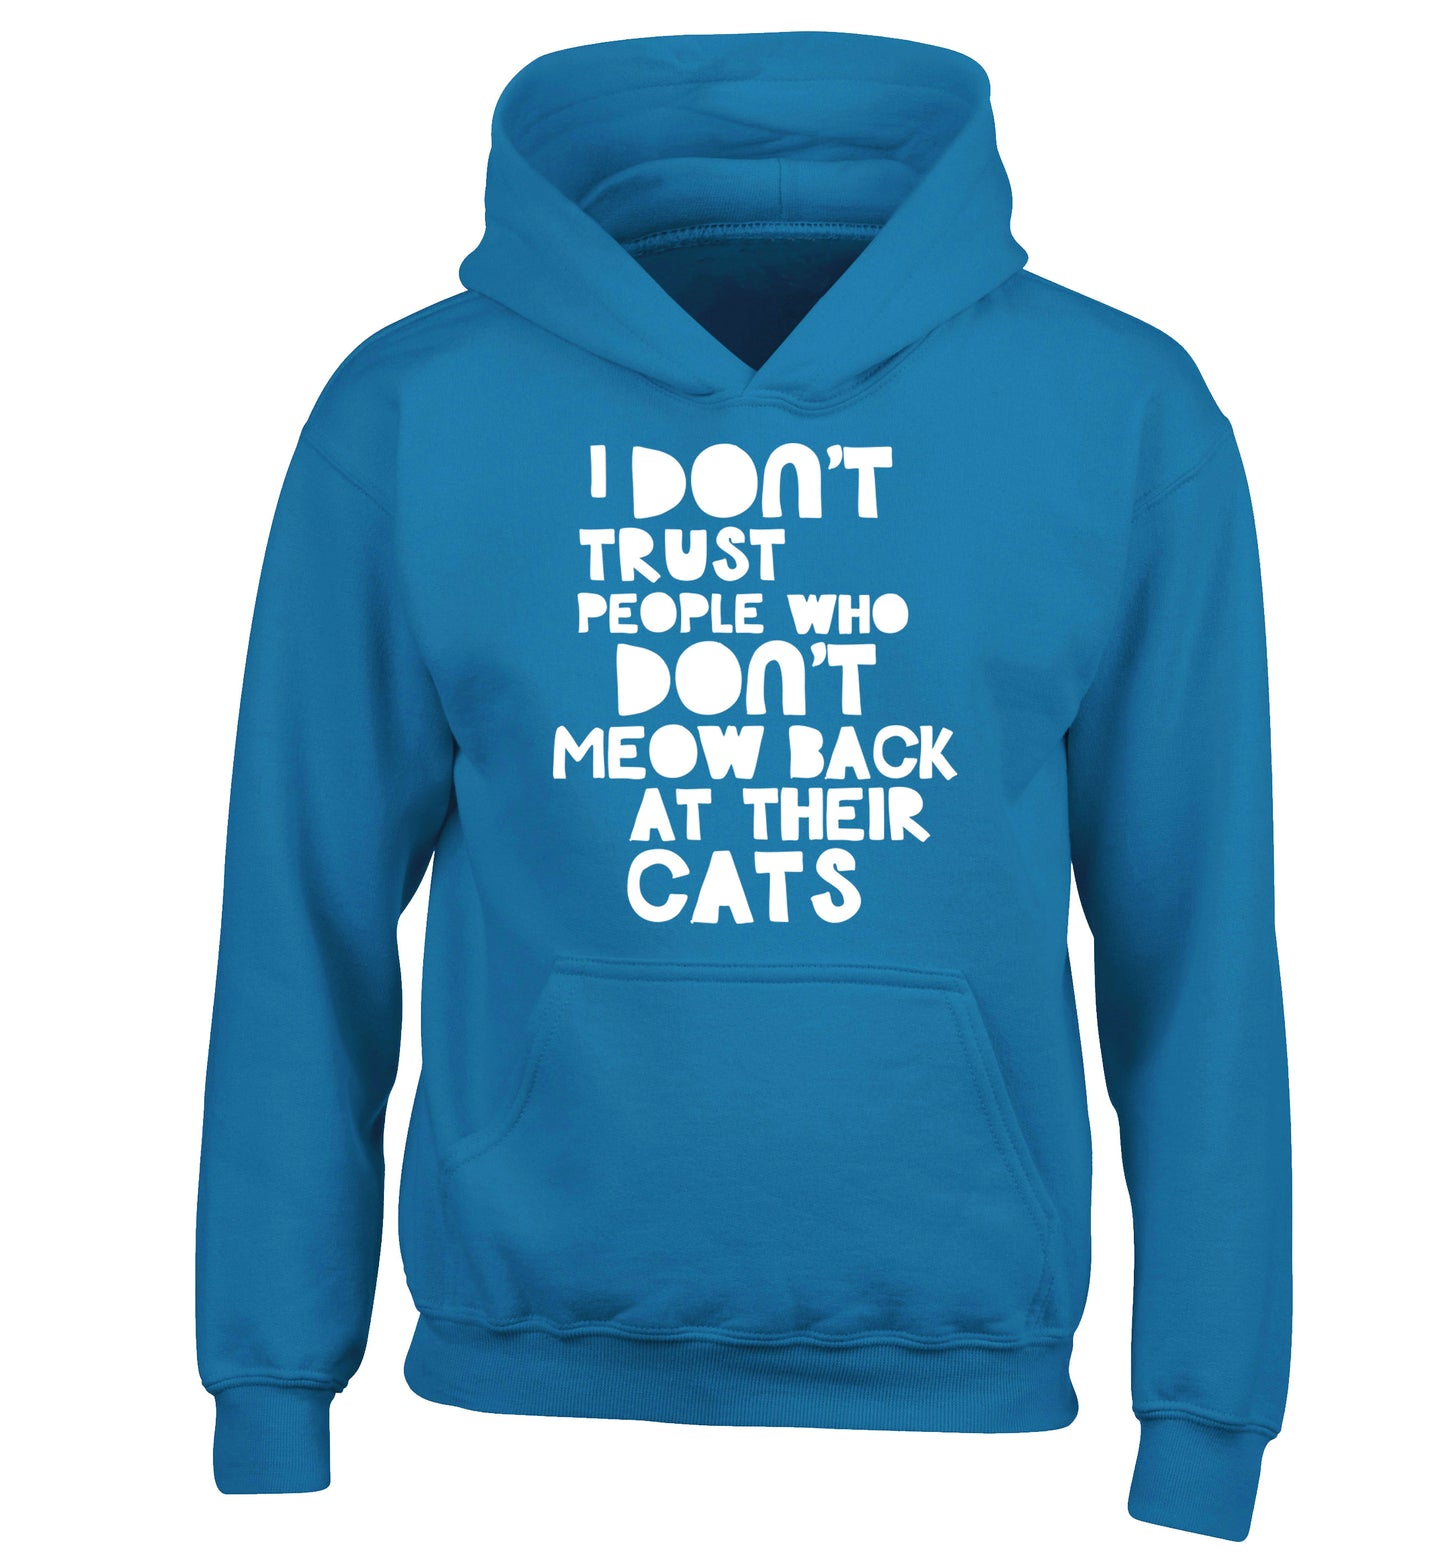 I don't trust people who don't meow back at their cats children's blue hoodie 12-13 Years